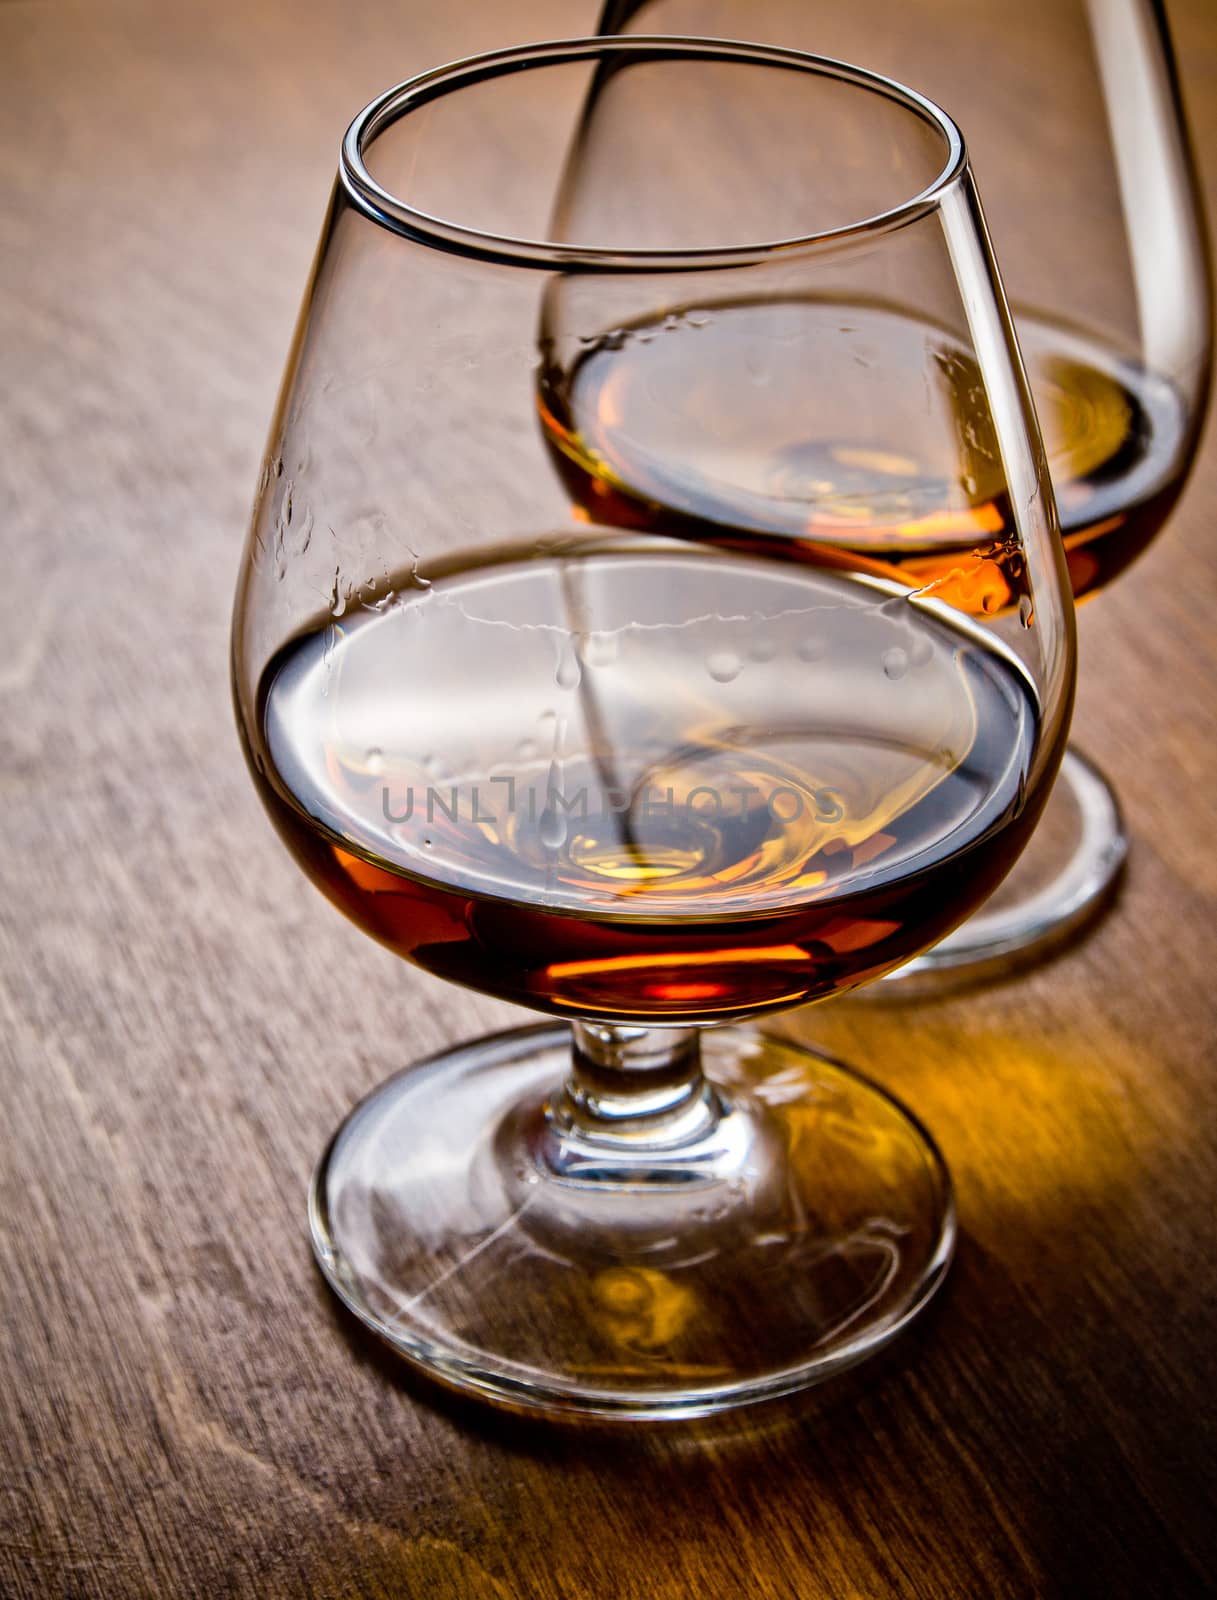 Two glasses of cognac on a wooden table